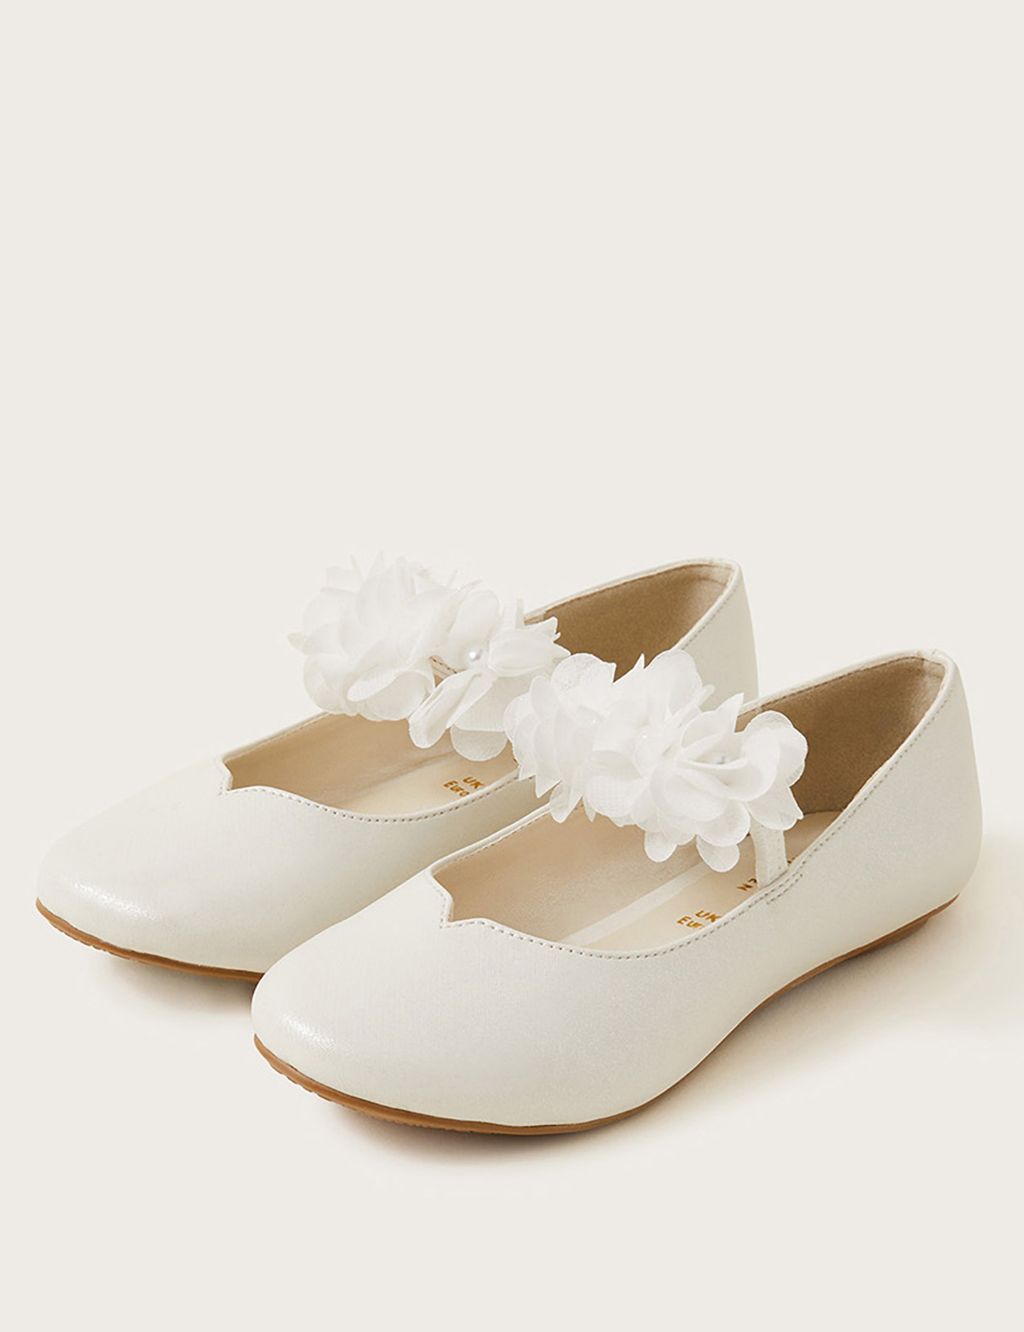 Kids' Floral Ballerina Party Shoes (1 Large-13 Large) 1 of 3